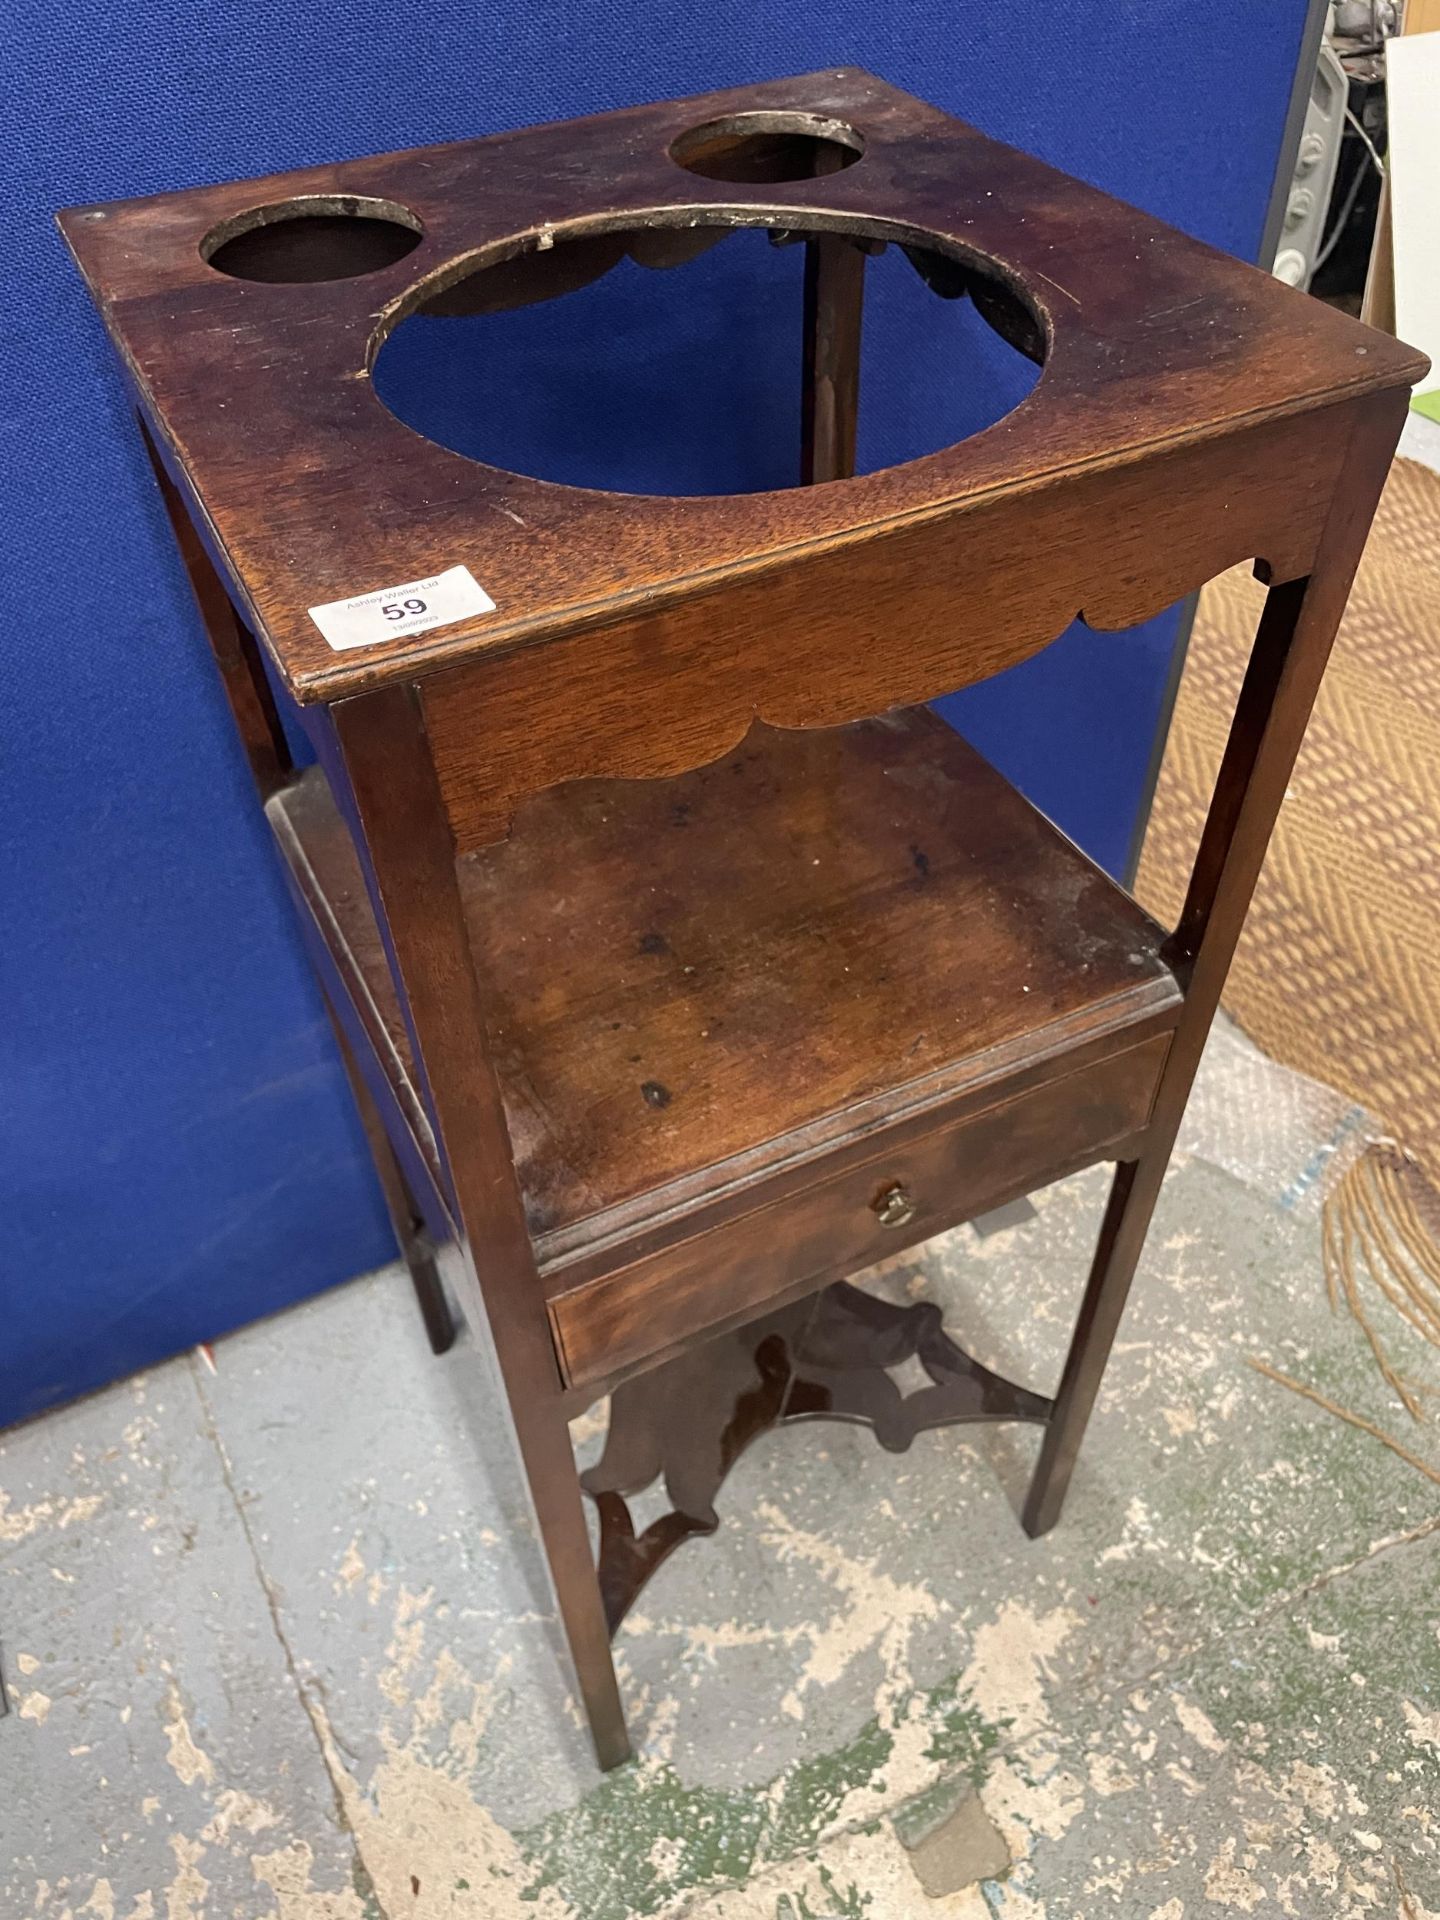 A VINTAGE OAK WASH STAND WITH LOWER DRAWER - Image 2 of 3